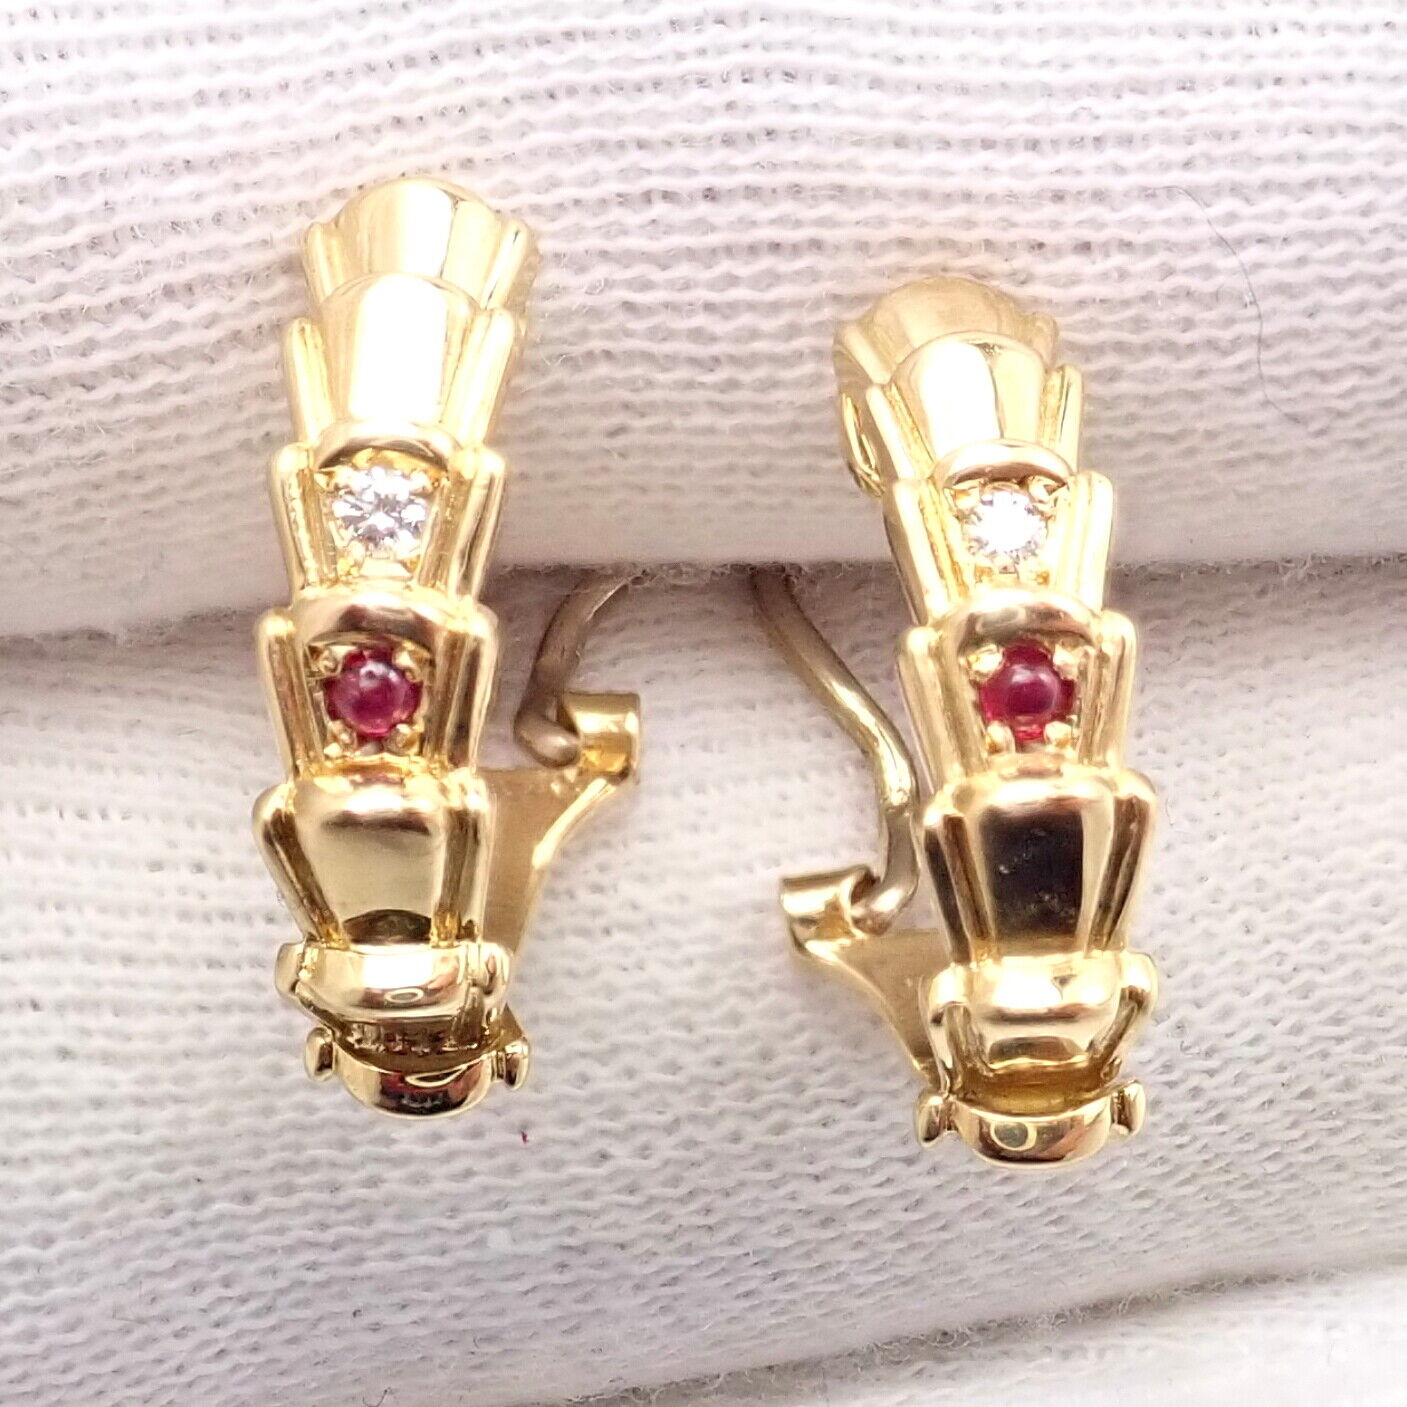 Christian Dior Jewelry & Watches:Fine Jewelry:Earrings Rare! Authentic Christian Dior 18k Yellow Gold Diamond Ruby Earrings